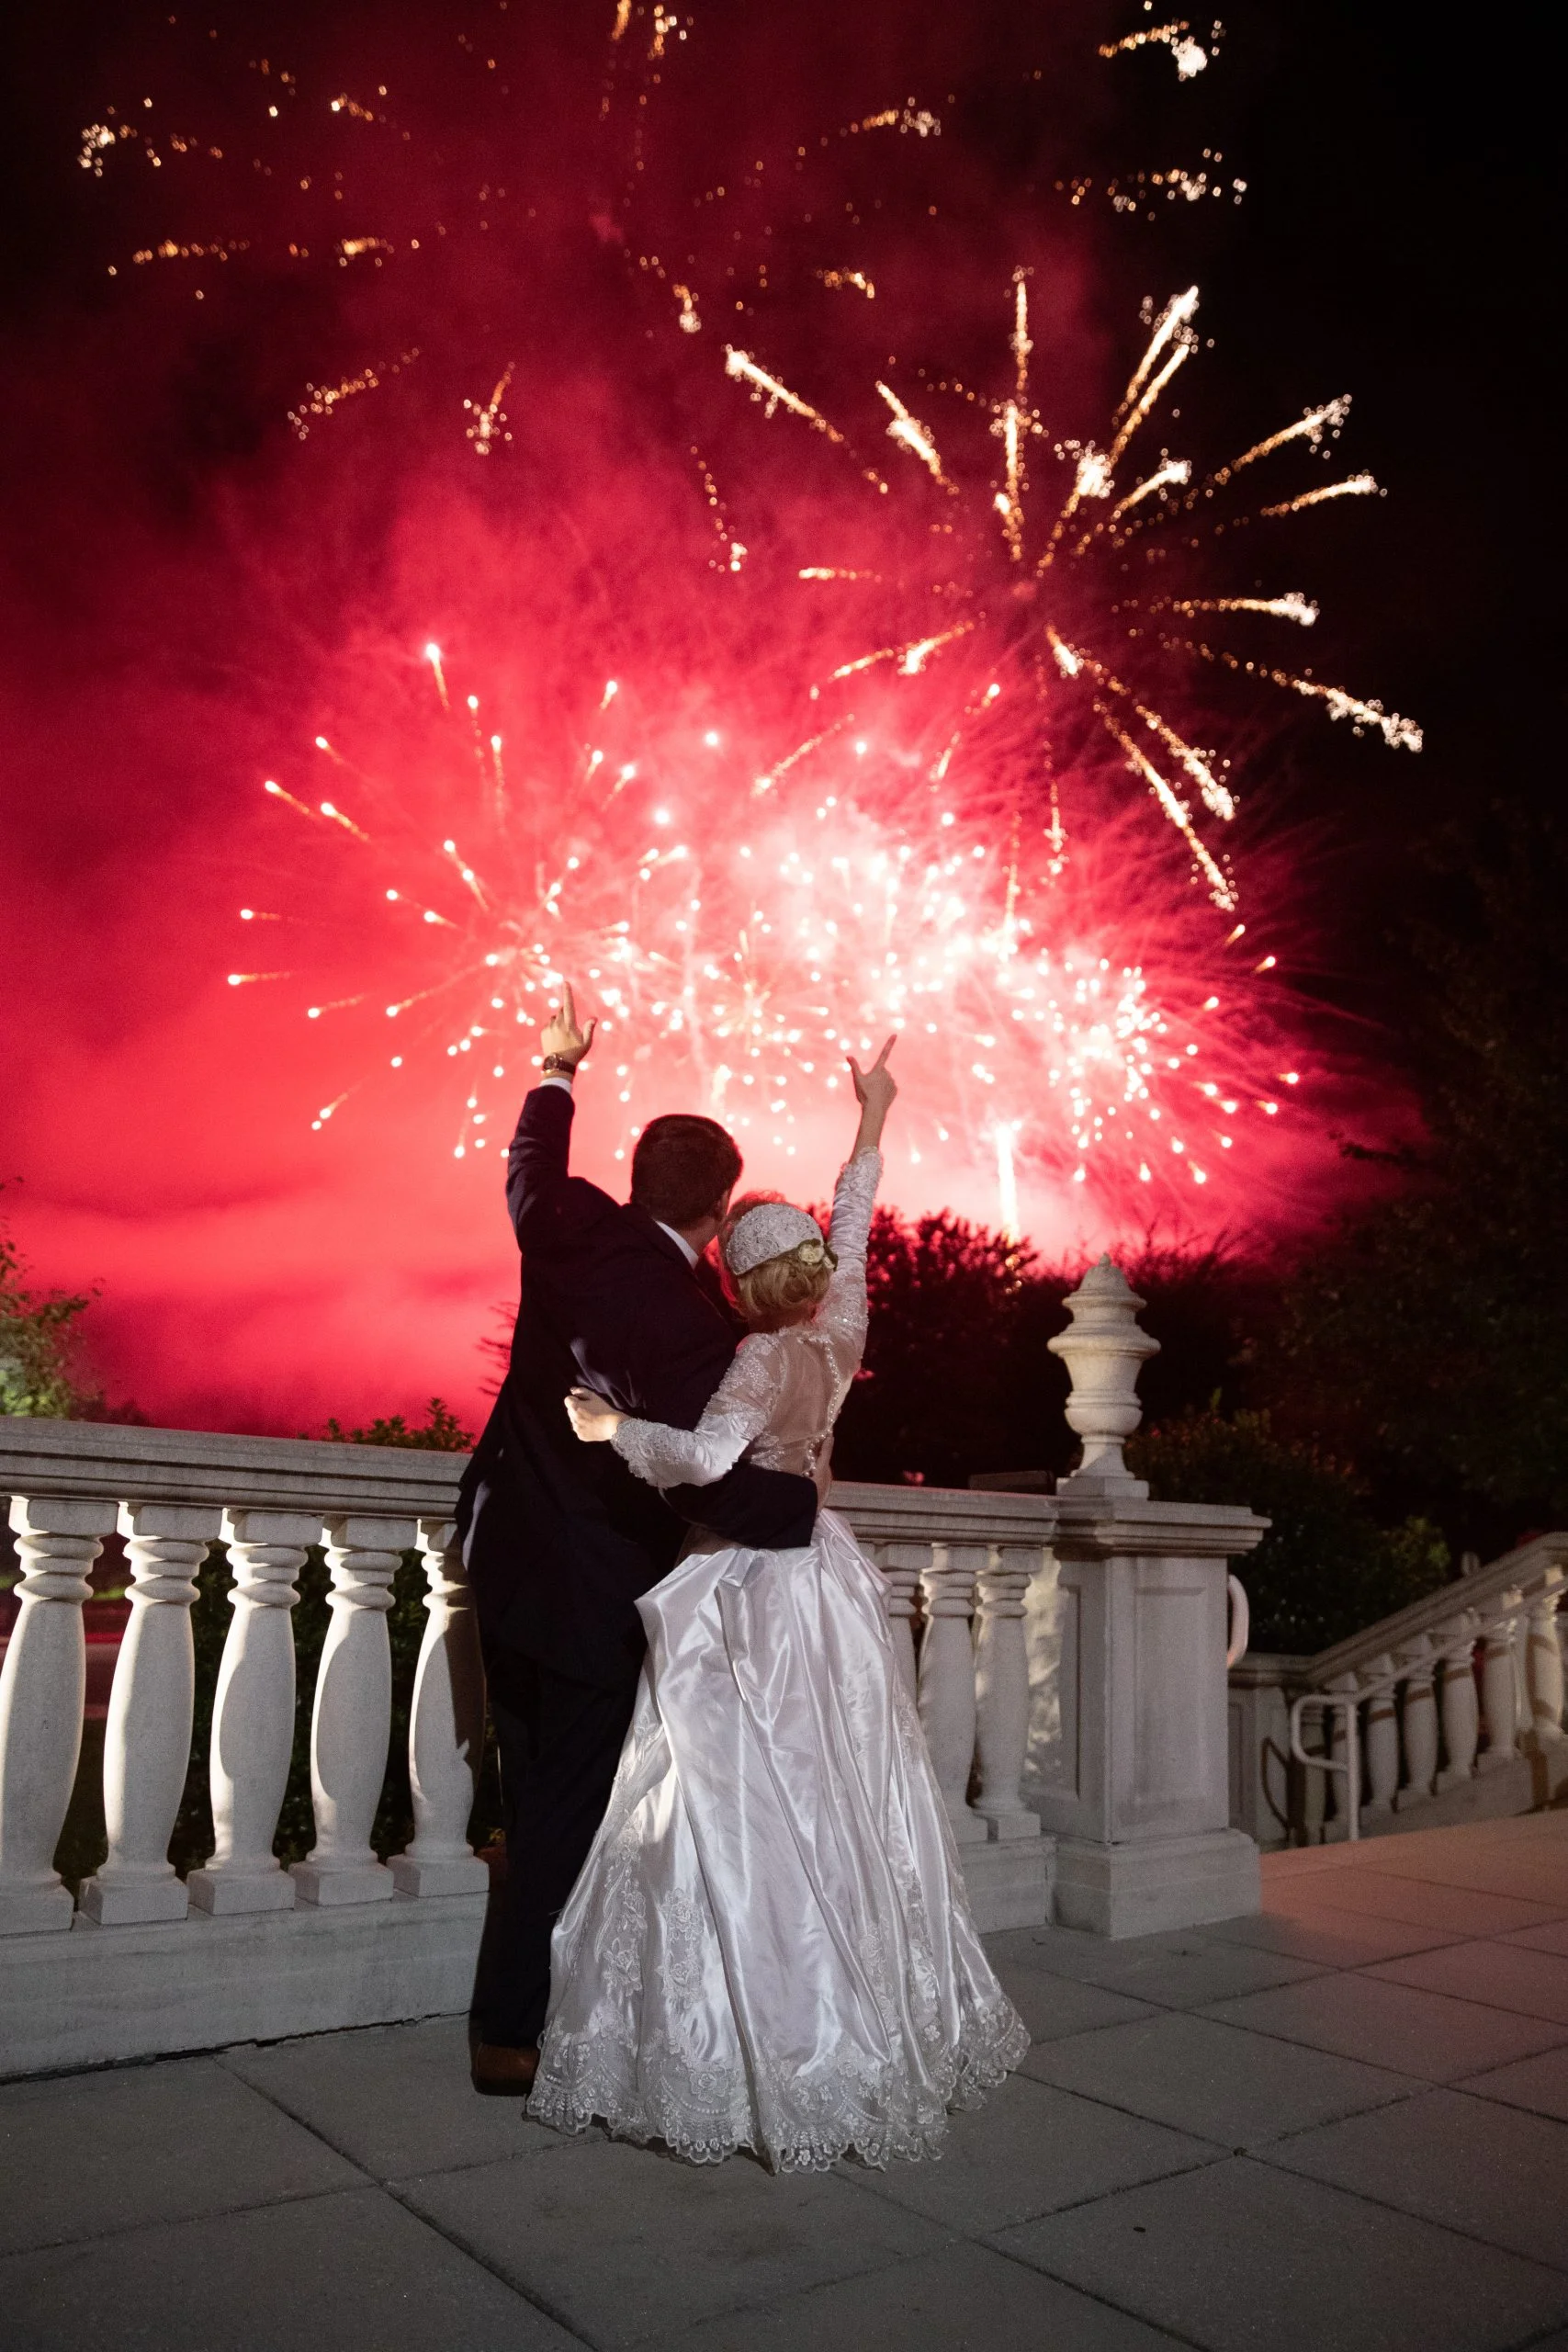 A bride and groom standing on a balcony with fireworks in the background.